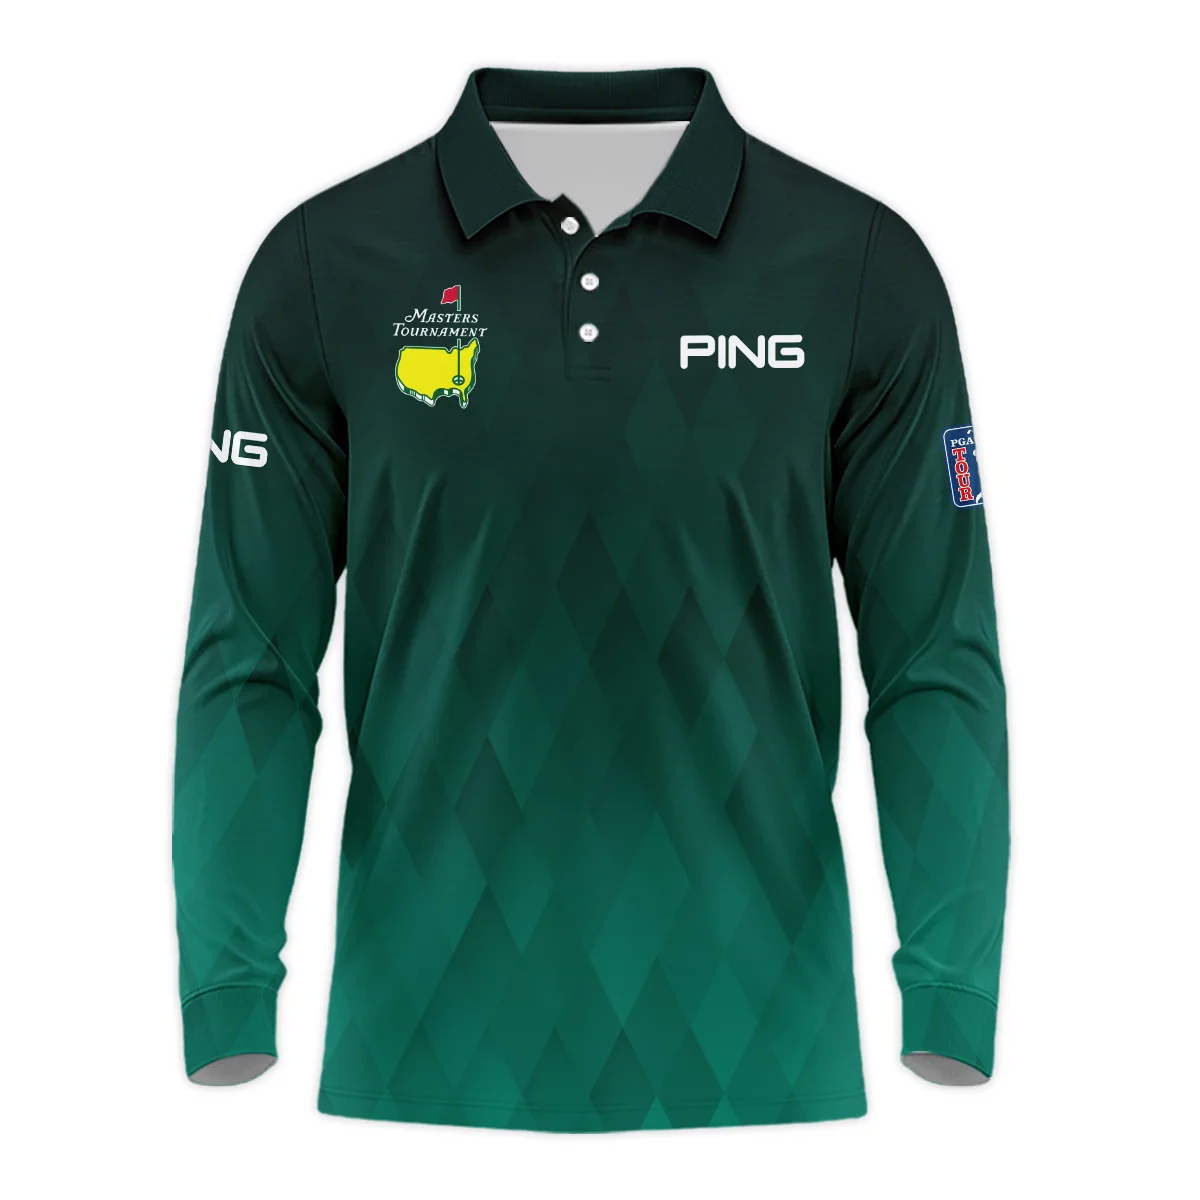 Gradient Dark Green Geometric Pattern Masters Tournament Ping Vneck Polo Shirt Style Classic Polo Shirt For Men